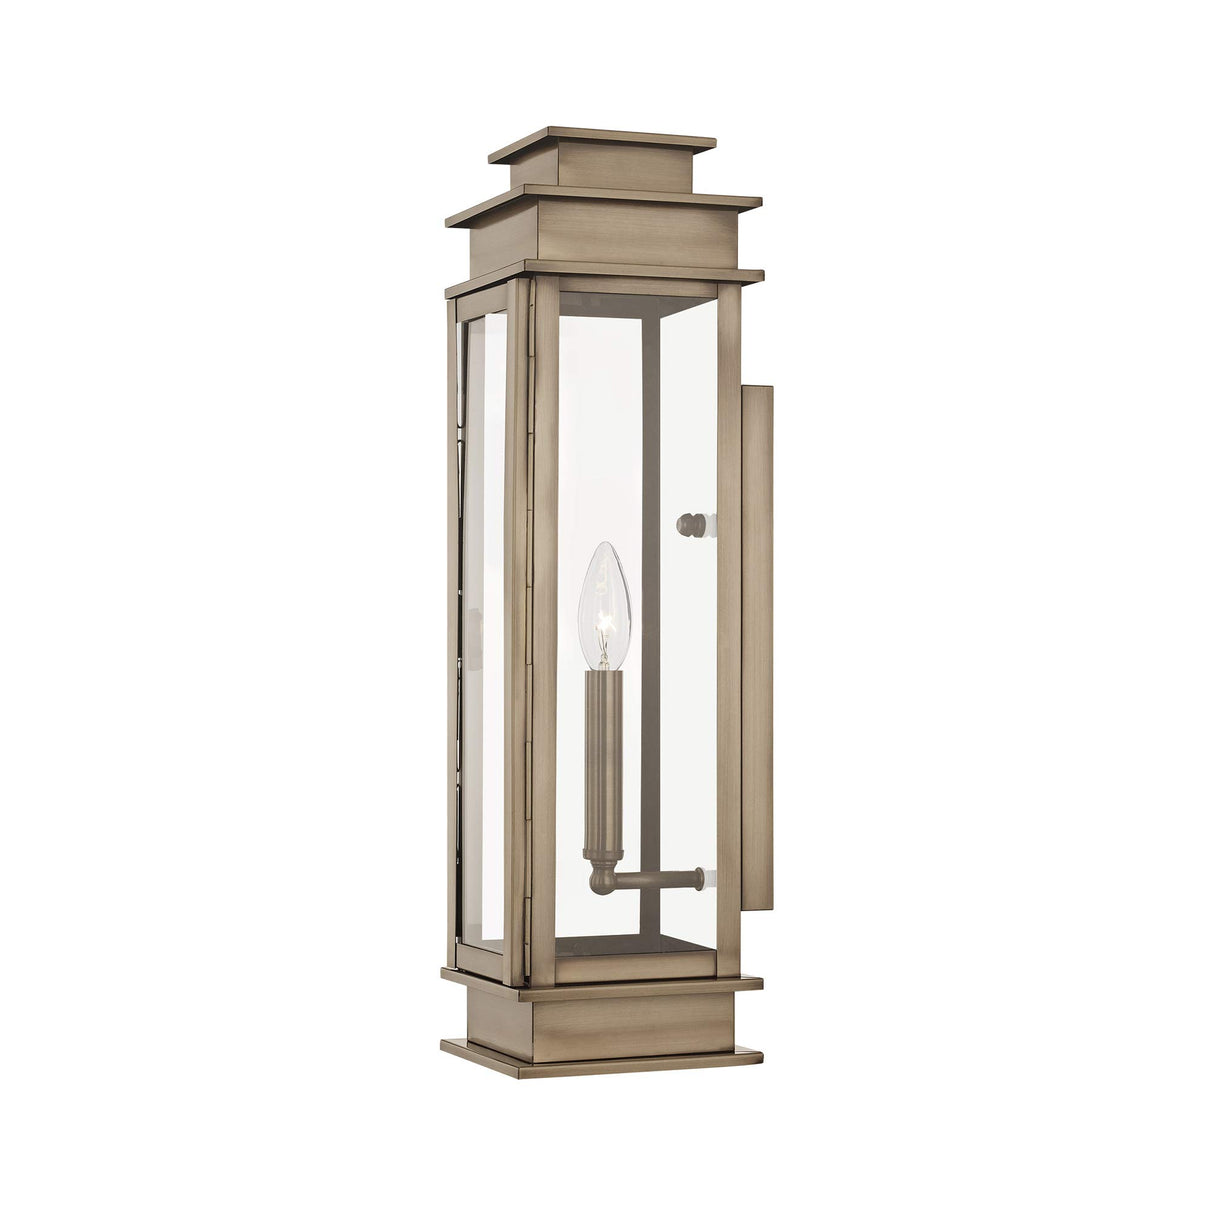 Livex Lighting 20207-29 Transitional One Light Outdoor Wall Lantern from Princeton Collection in Pwt, Nckl, B/S, Slvr. Finish, Vintage Pewter